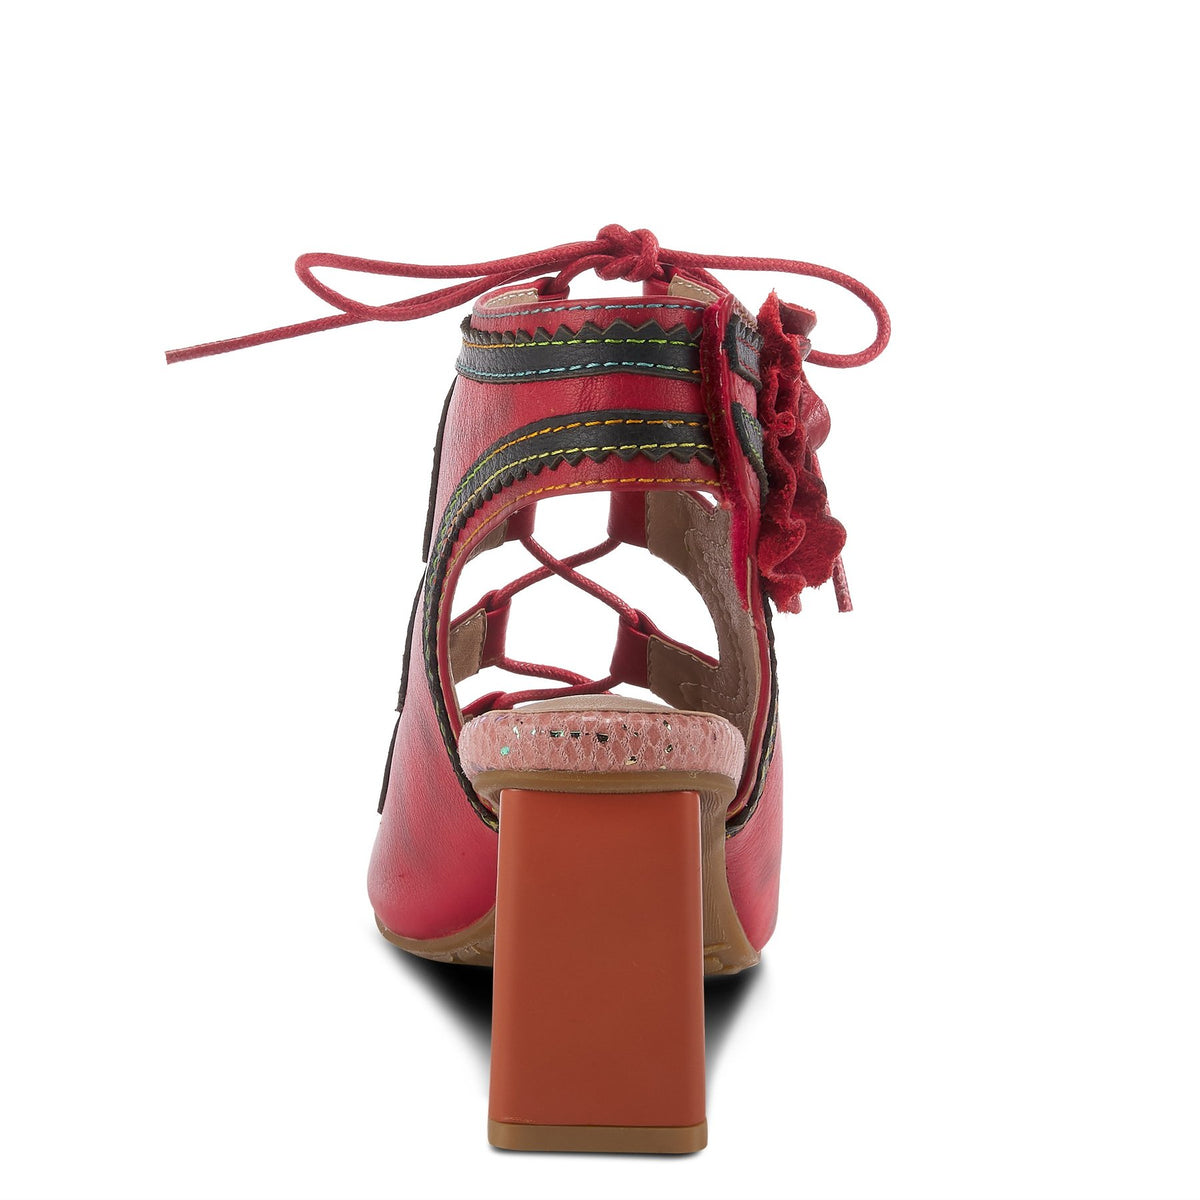 French inspired, hand-painted burnished leather ghillie sandal by L'Artiste Springstep Footwear featuring a hook and loop closure ankle strap with a decorative flower, rainbow stitching and waxed cotton laces on an architectural block hee